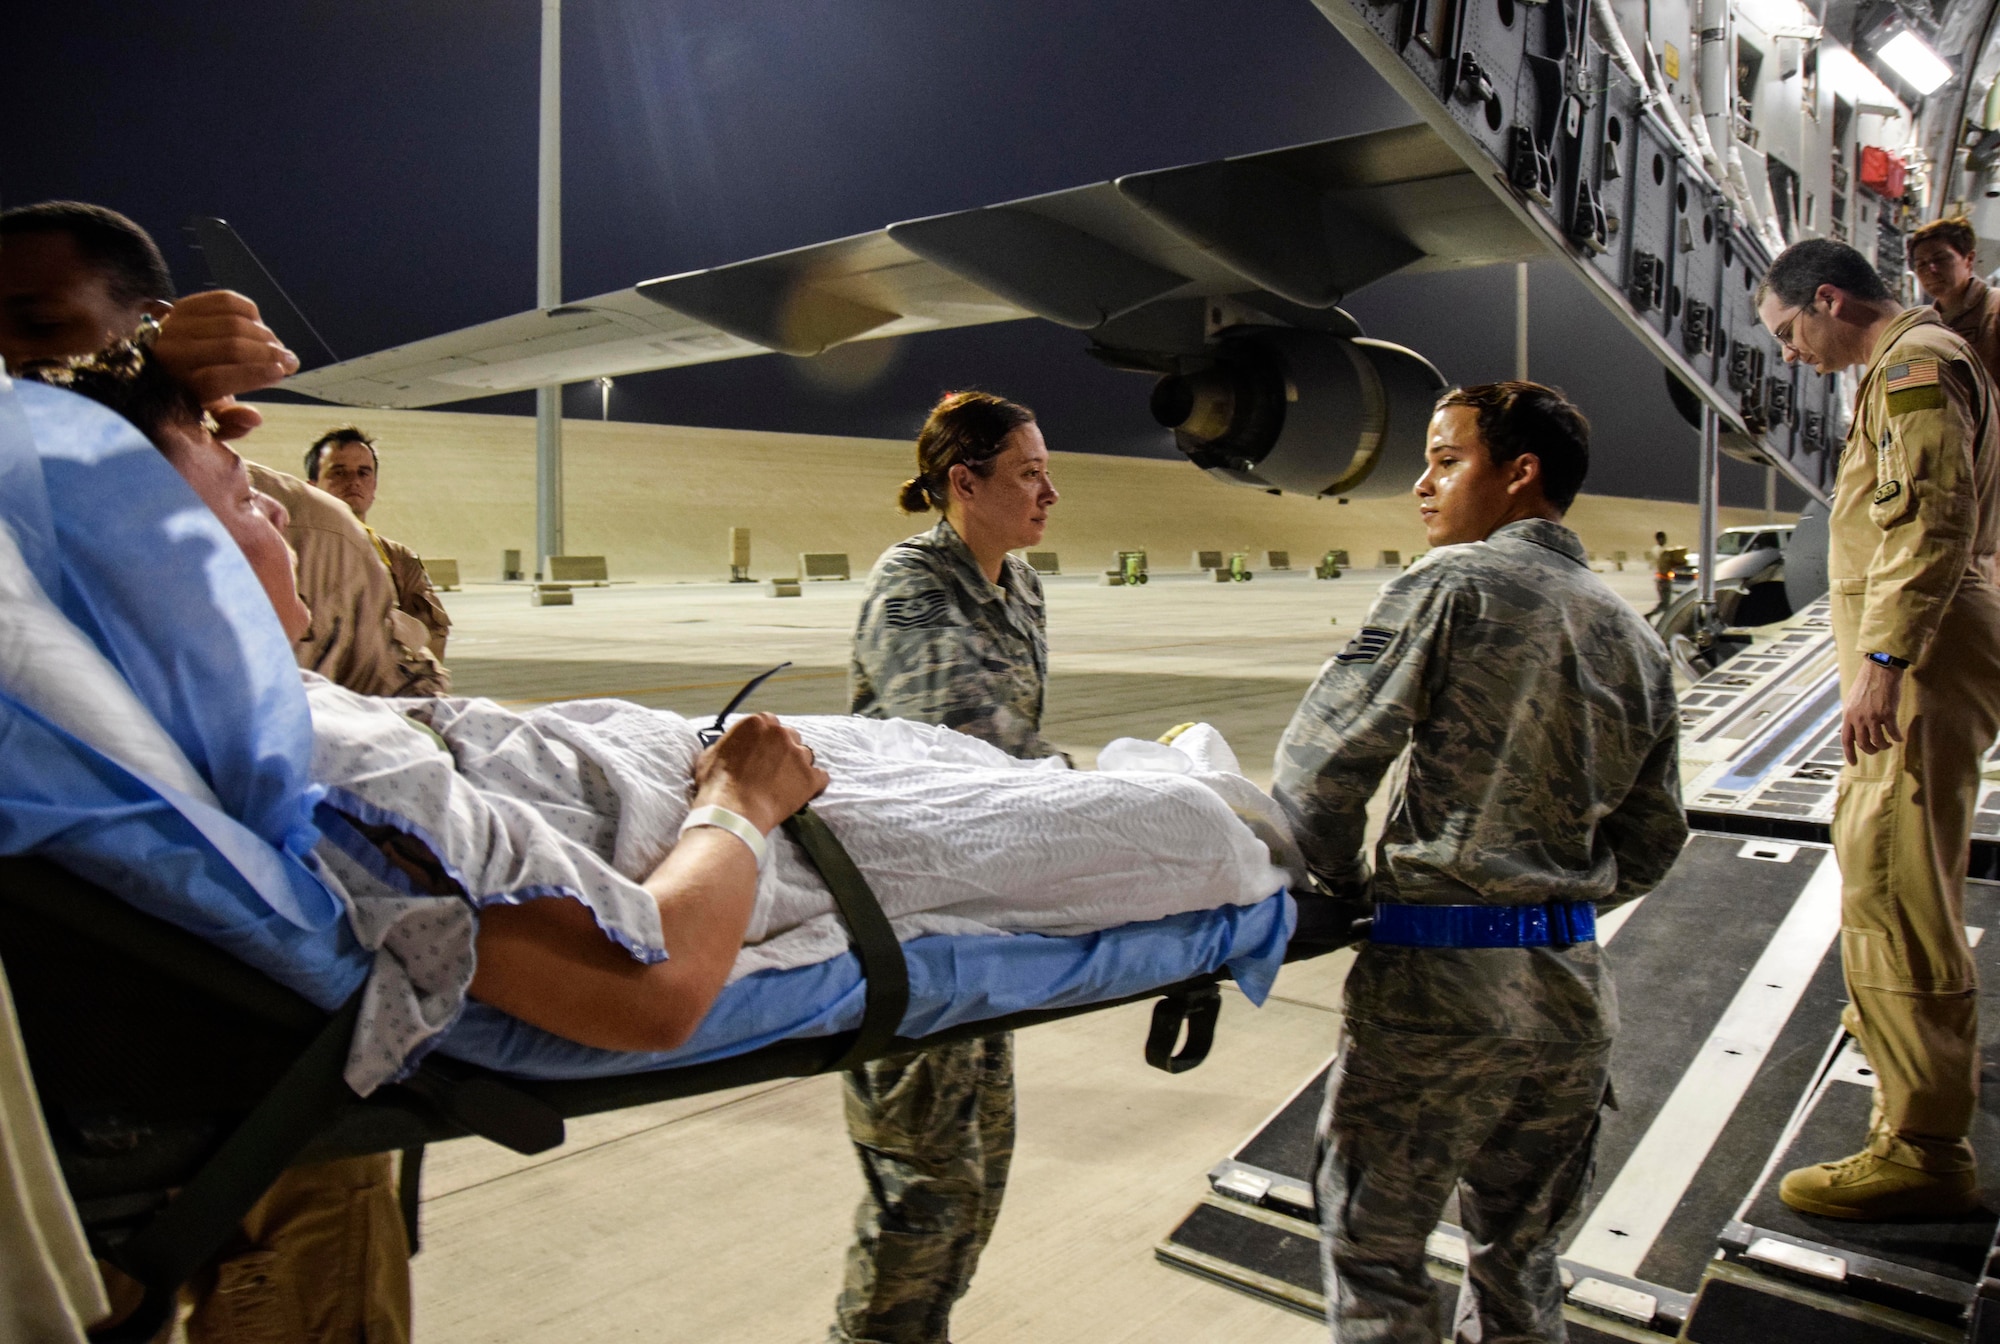 Technical Sgt. Erin Trueblood (top left) and Staff Sgt. Luis Hernandez, 379th Enroute Patient Staging Facility medical technicians, load a patient onto a C-17 Globemaster III July 18, 2016, from Al Udeid Air Base, Qatar.  The patients were enroute to Landstuhl Regional Medical Center in Germany for a higher level of care. (U.S. Air Force photo/Technical Sgt. Carlos J. Treviño)